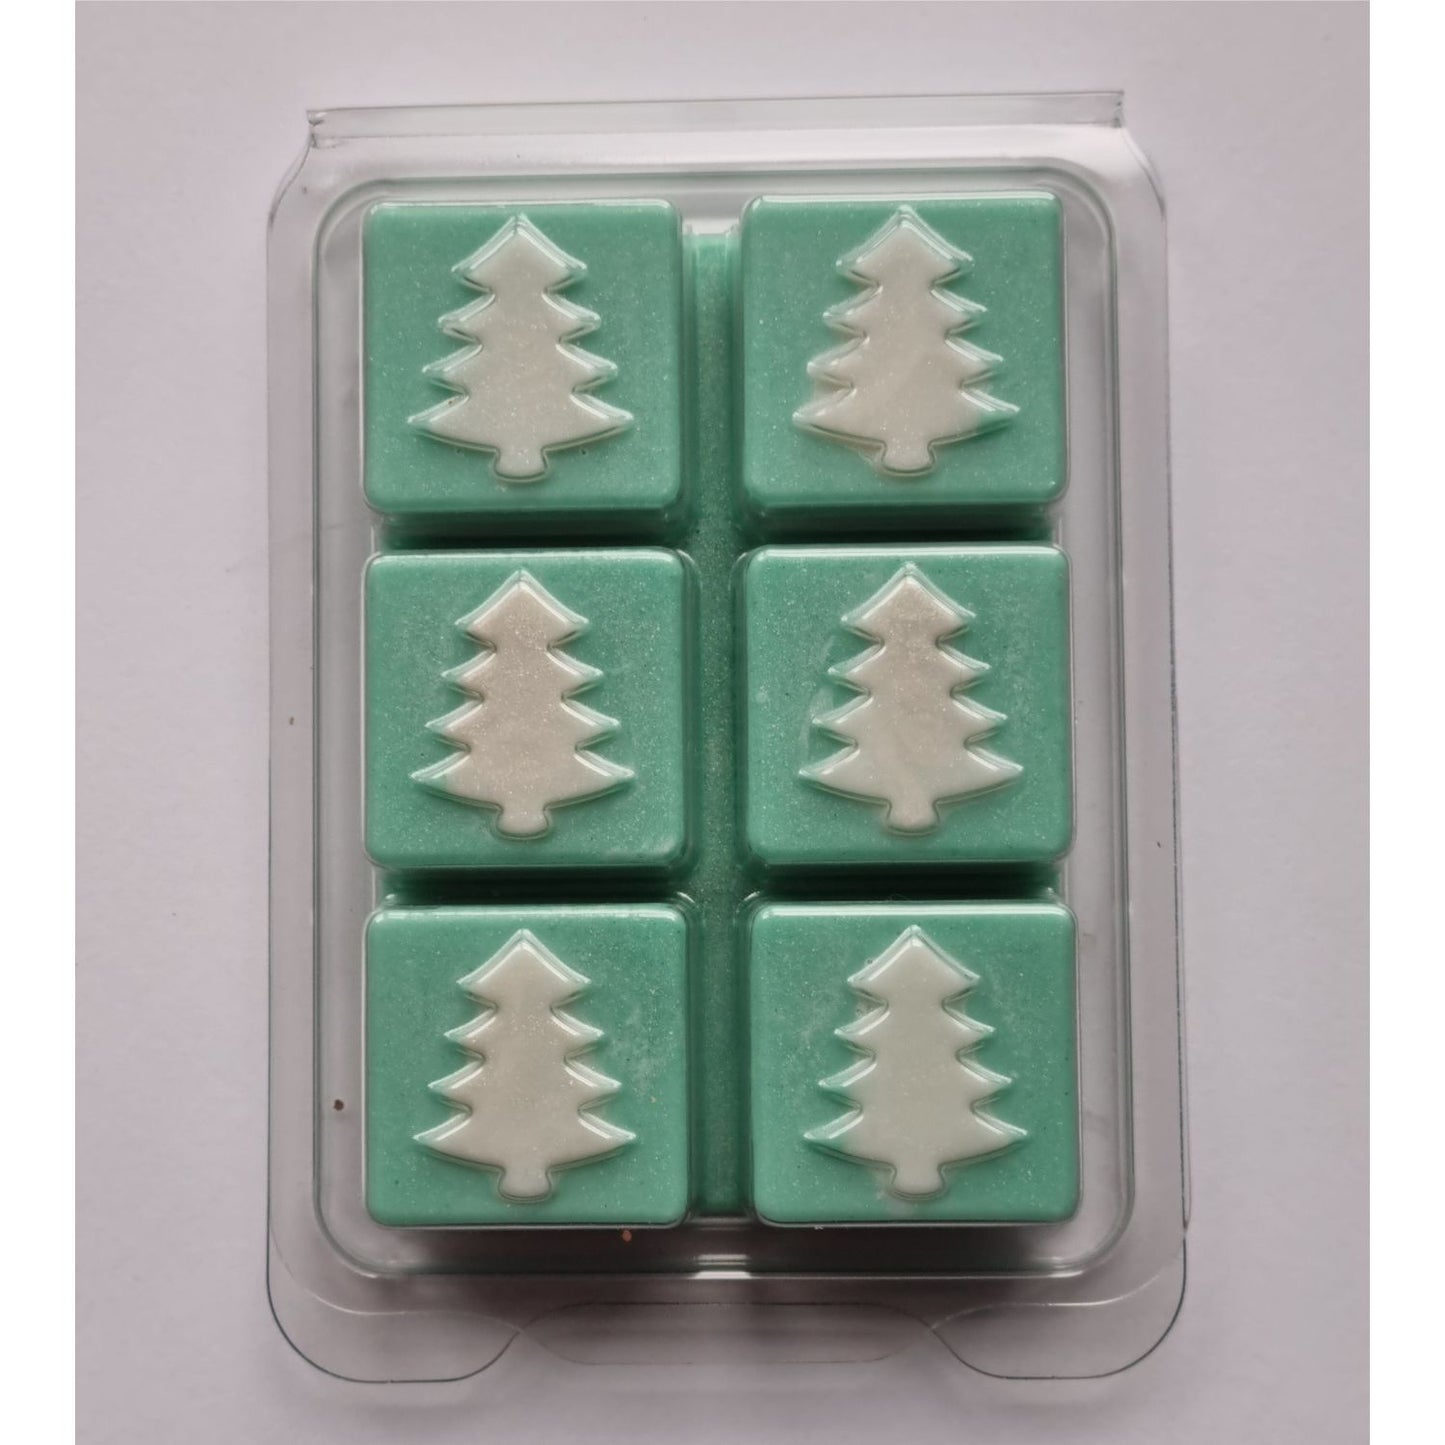 Xmas Scented Soy Wax Melts in 6 block Christmas Tree Clamshell green wax melts cubes with white christmas tree